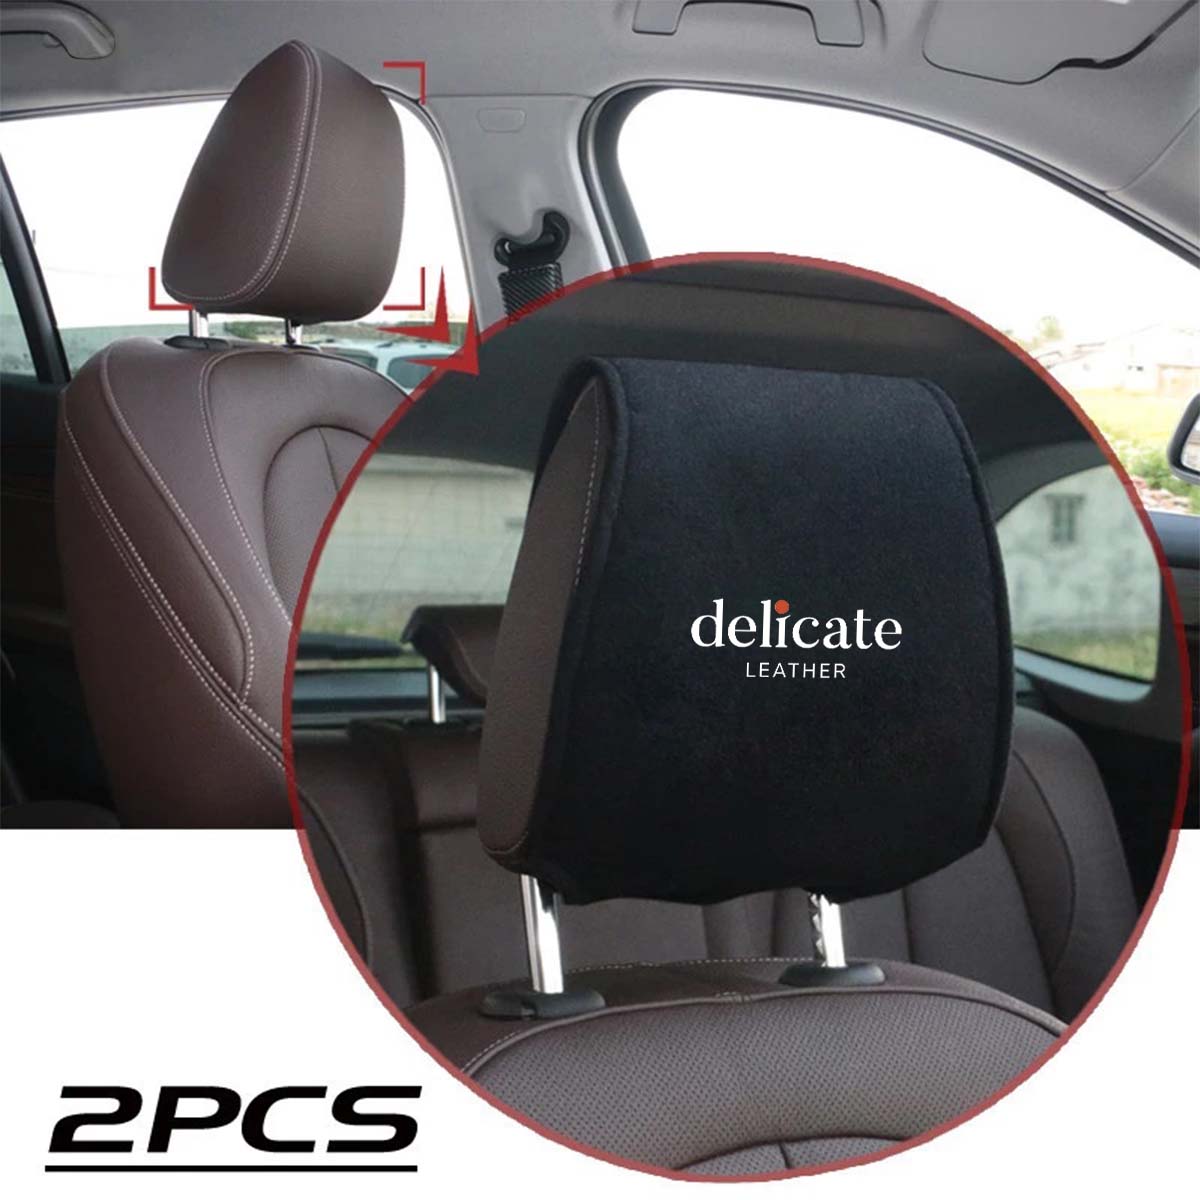 Car Seat Headrest Cover Breathable Flexible Headrest Covers Velcro Auto Headrest Covers Universal Fit, Custom For Your Cars, Car Accessories HY13998 - Delicate Leather